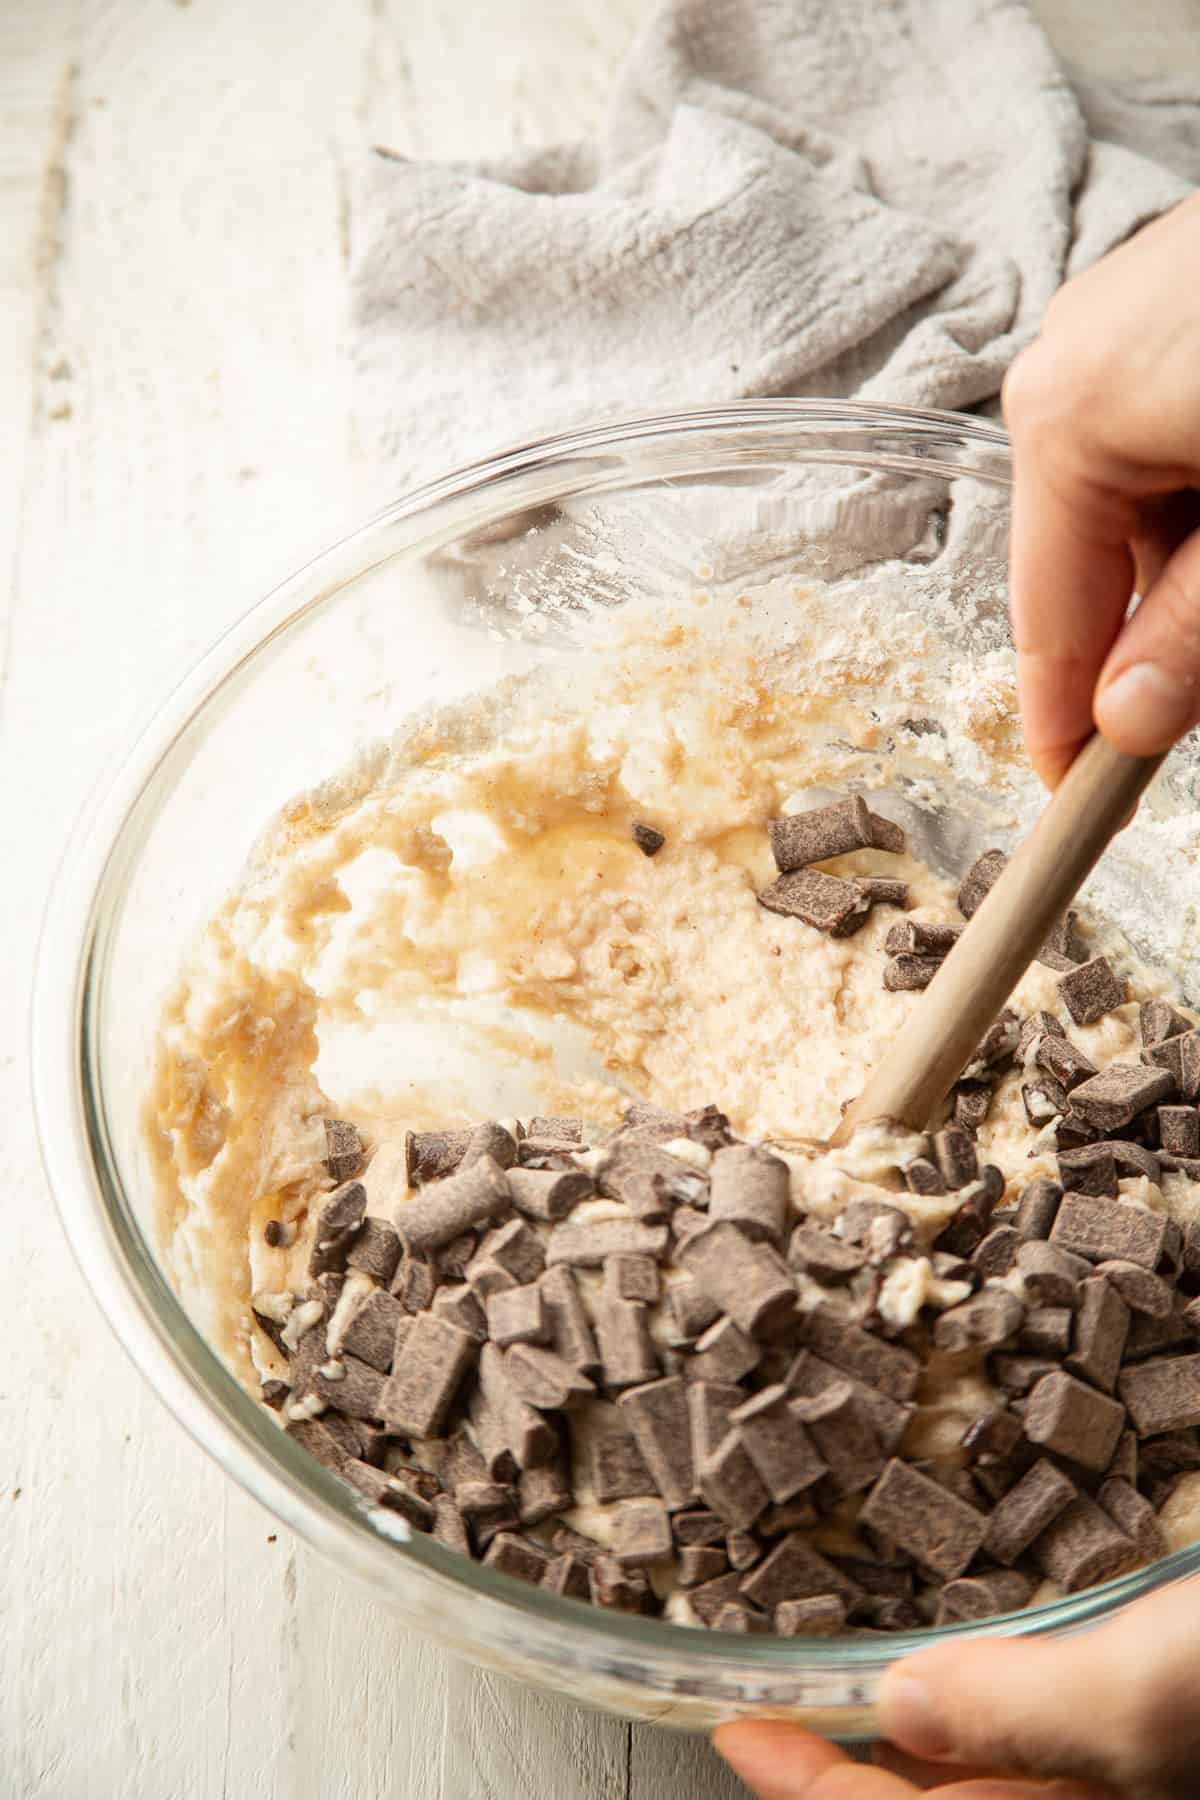 Hand folding chocolate chunks into a bowl of muffin batter.